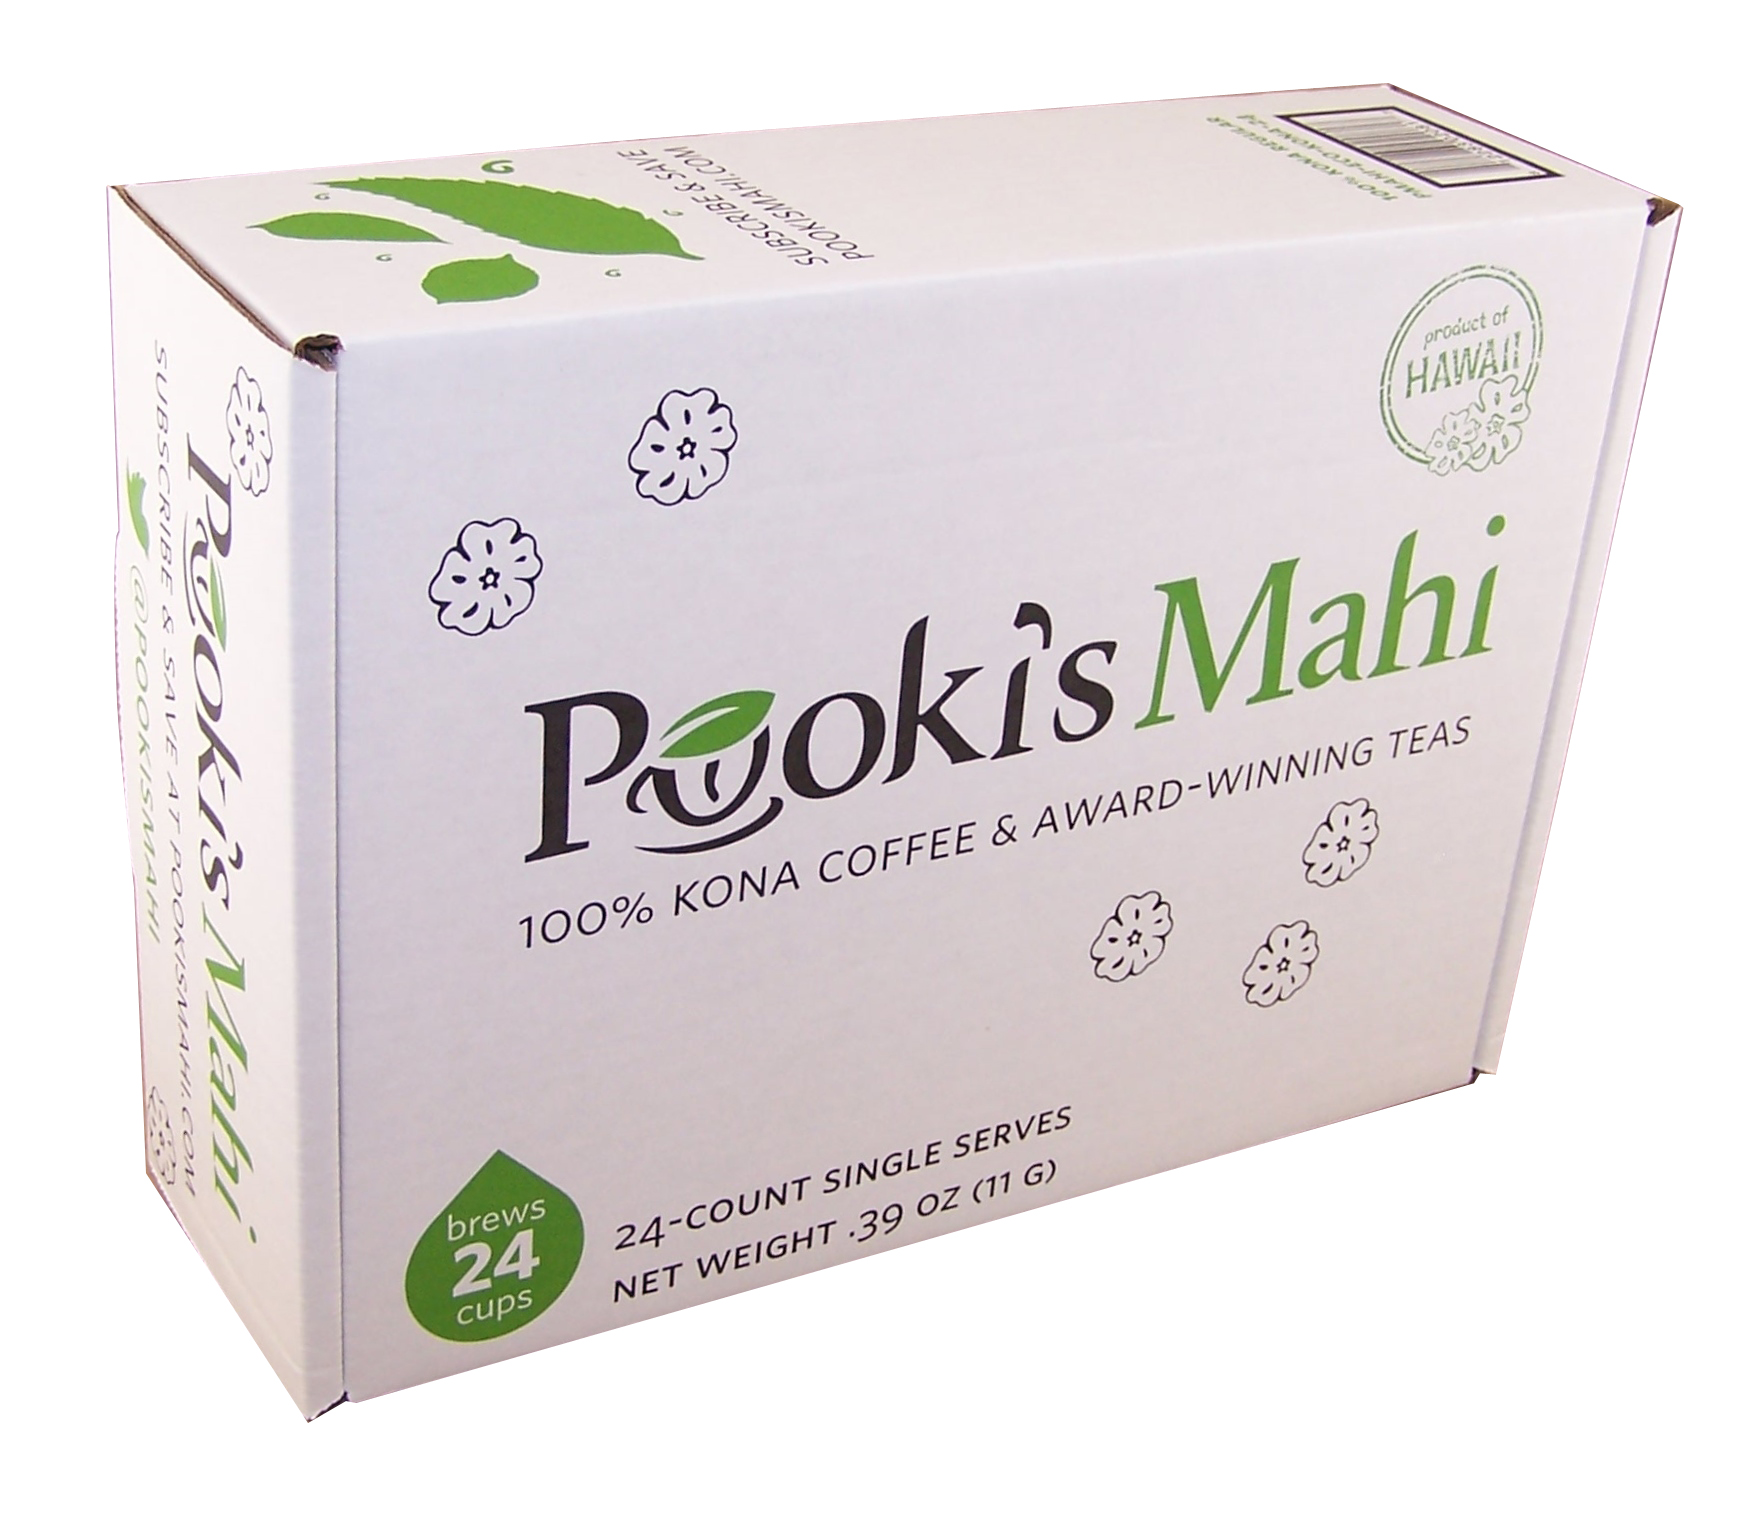 Pooki's Mahi's new environmentally packaging for sustainable 100% Kona coffee pods product line.